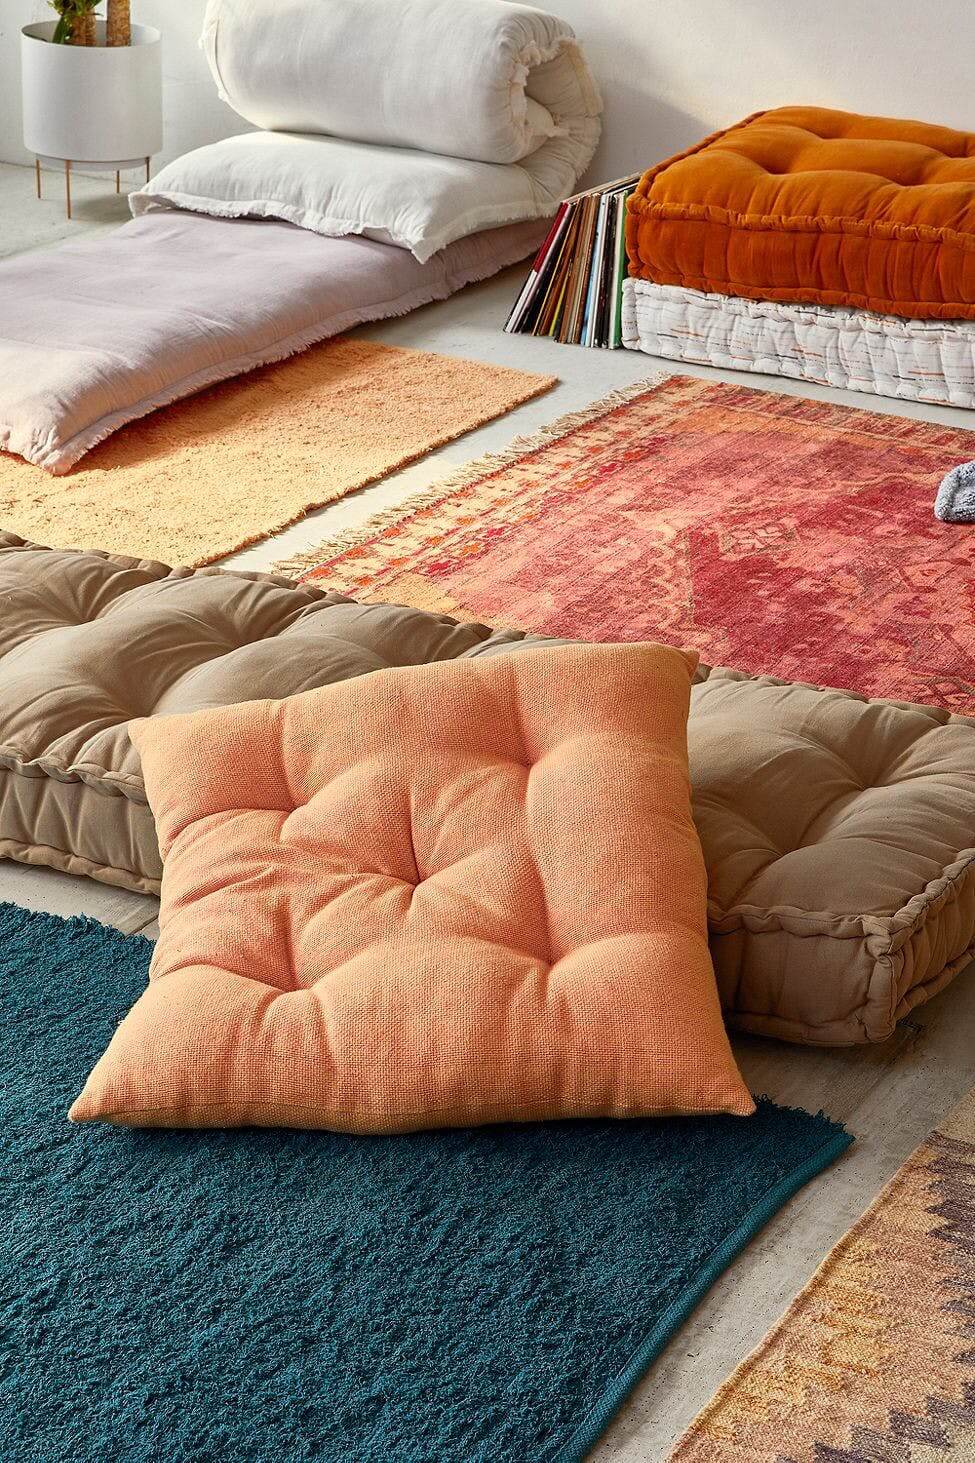 All the Soft Pillows